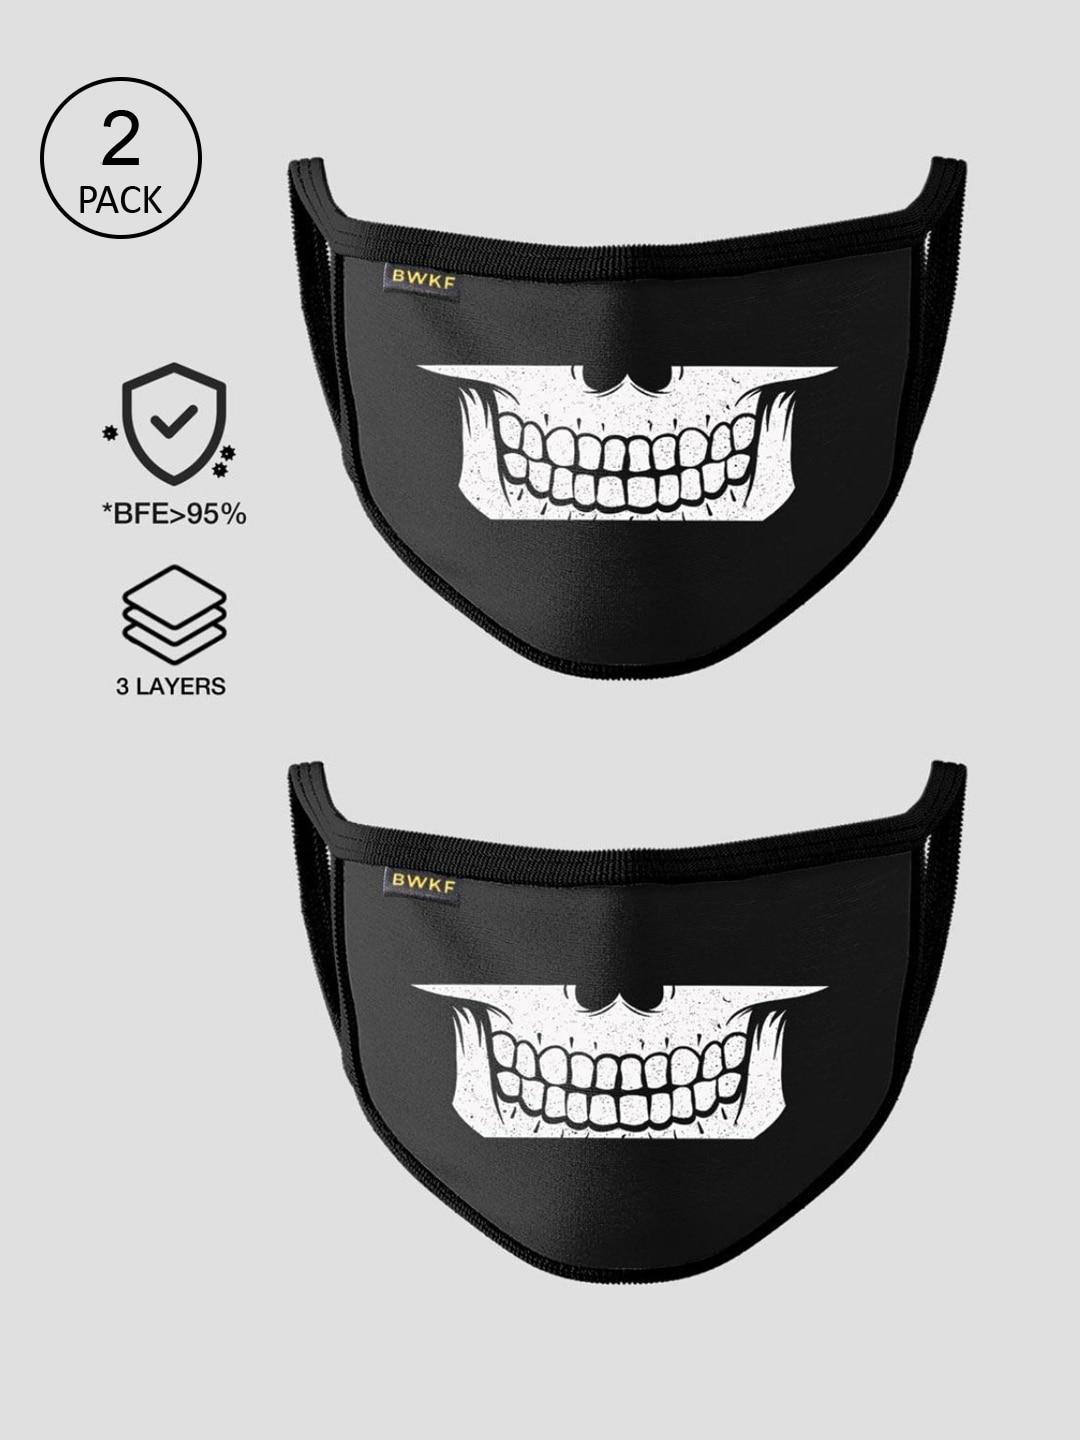 Bewakoof Unisex Pack Of 2 Black & White Printed 3-Ply Cotton Protective Outdoor Masks